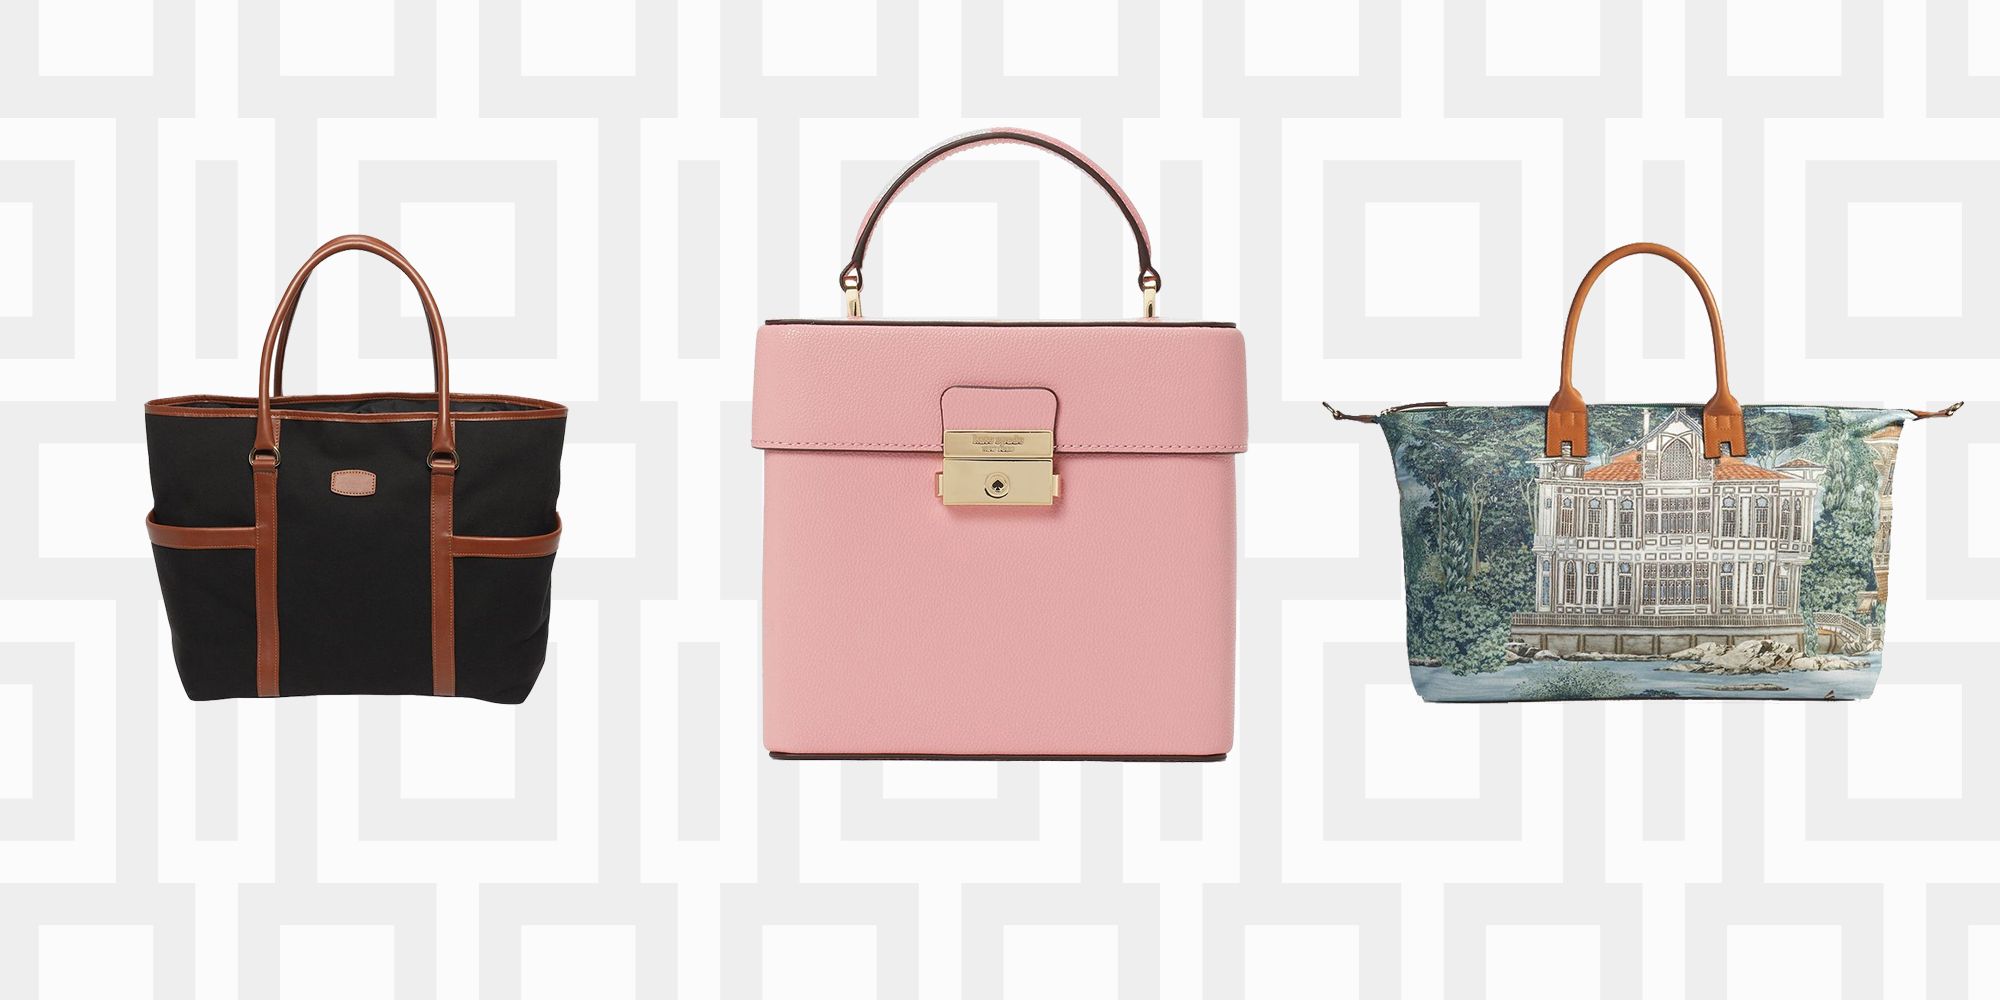 Head Back To The Office With A Chic Book Tote